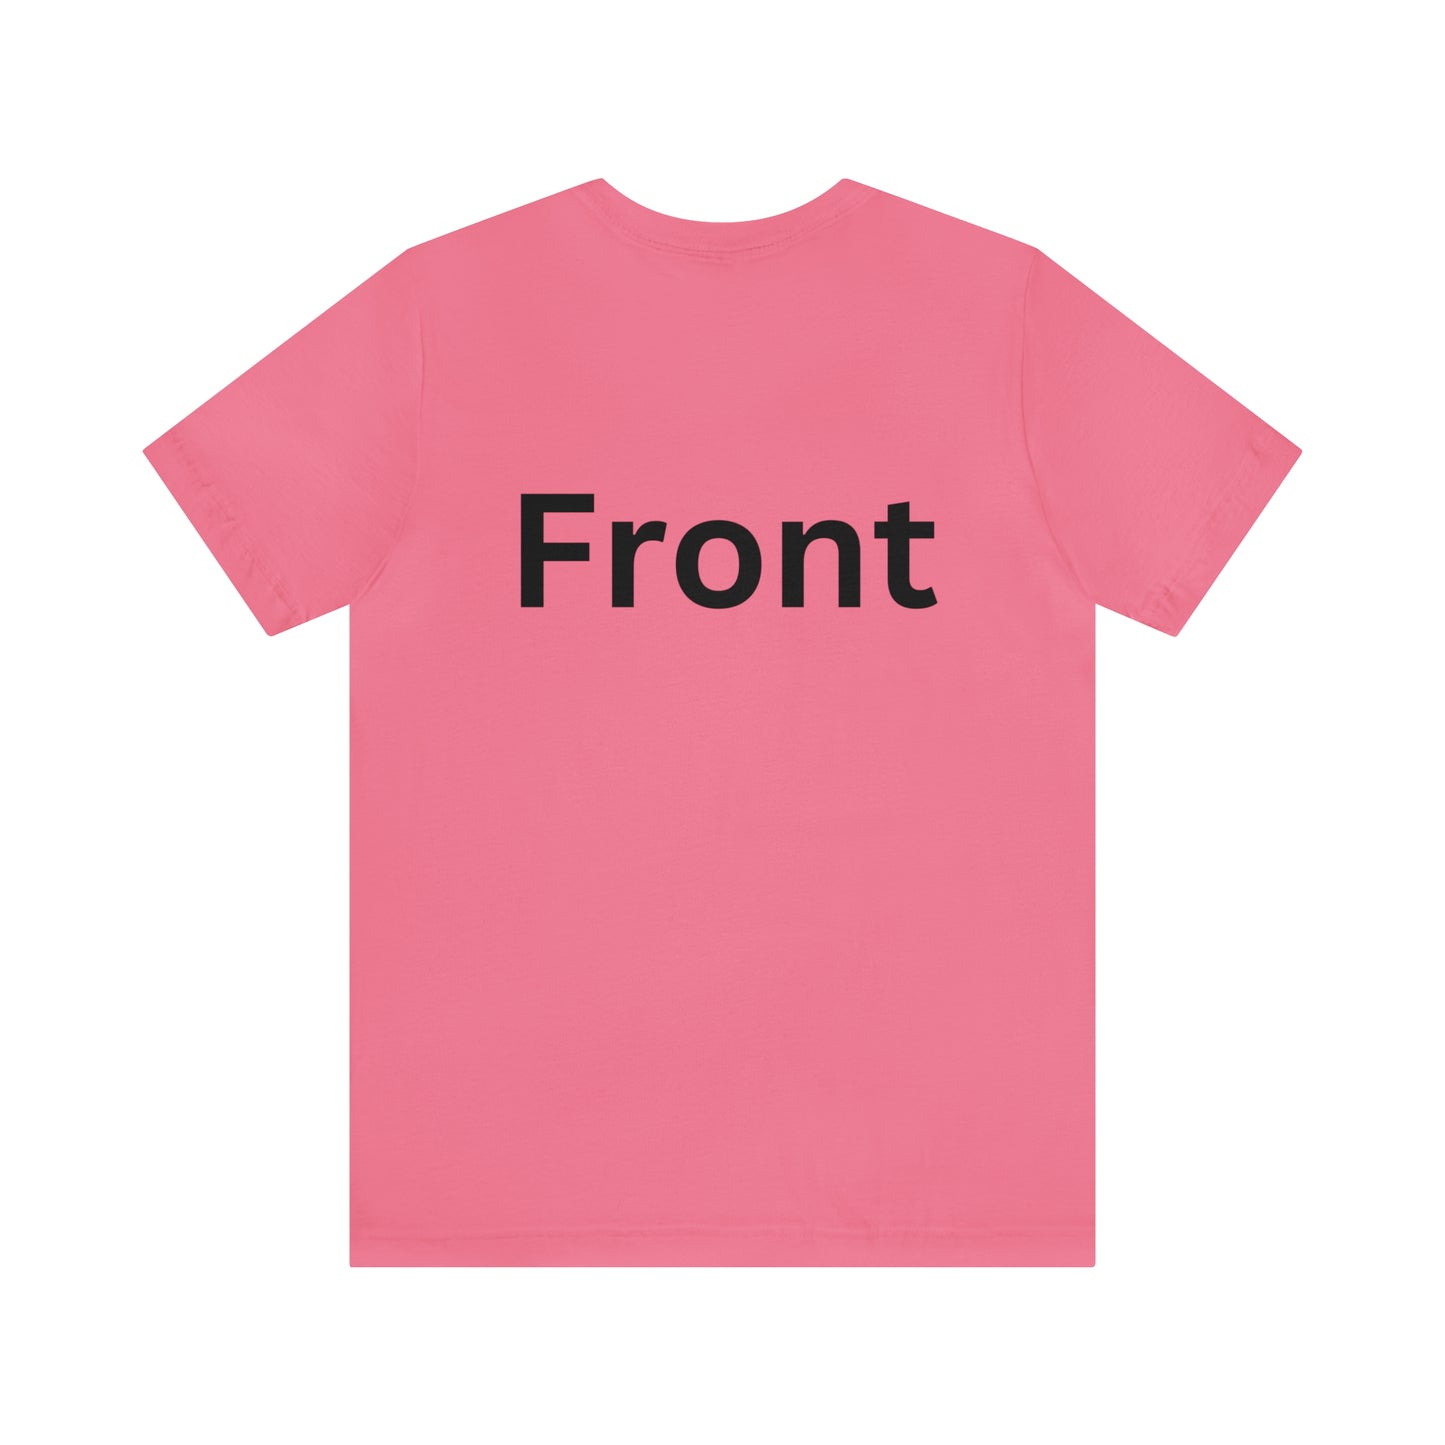 Back to - Front  Unisex Jersey Short Sleeve Tee